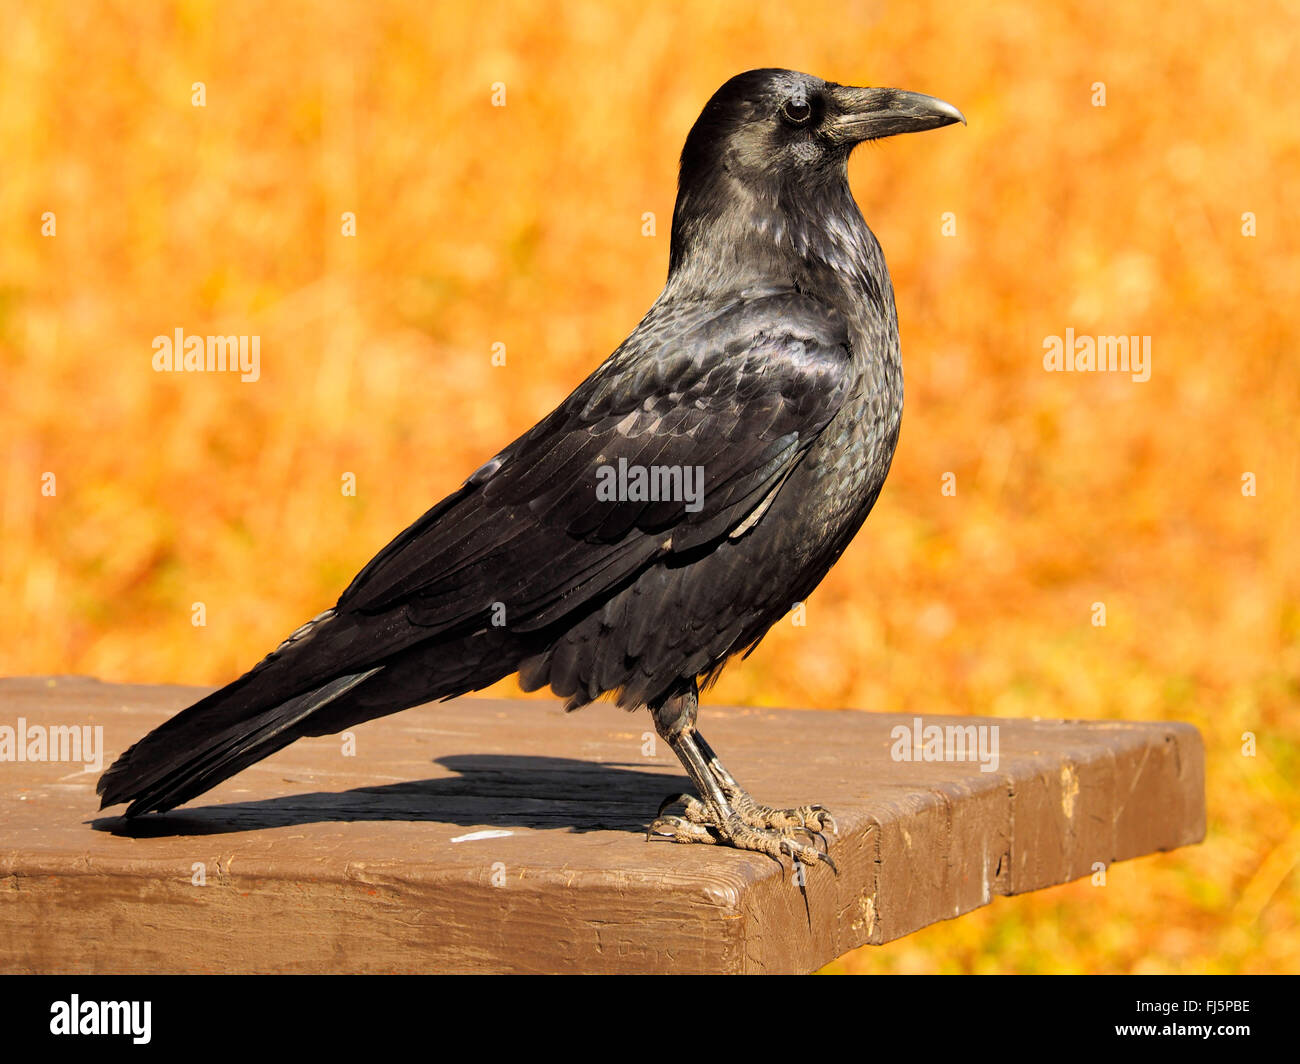 Grand corbeau (Corvus corax), est assis sur une table, USA, Wyoming, Yellowstone National Park Banque D'Images